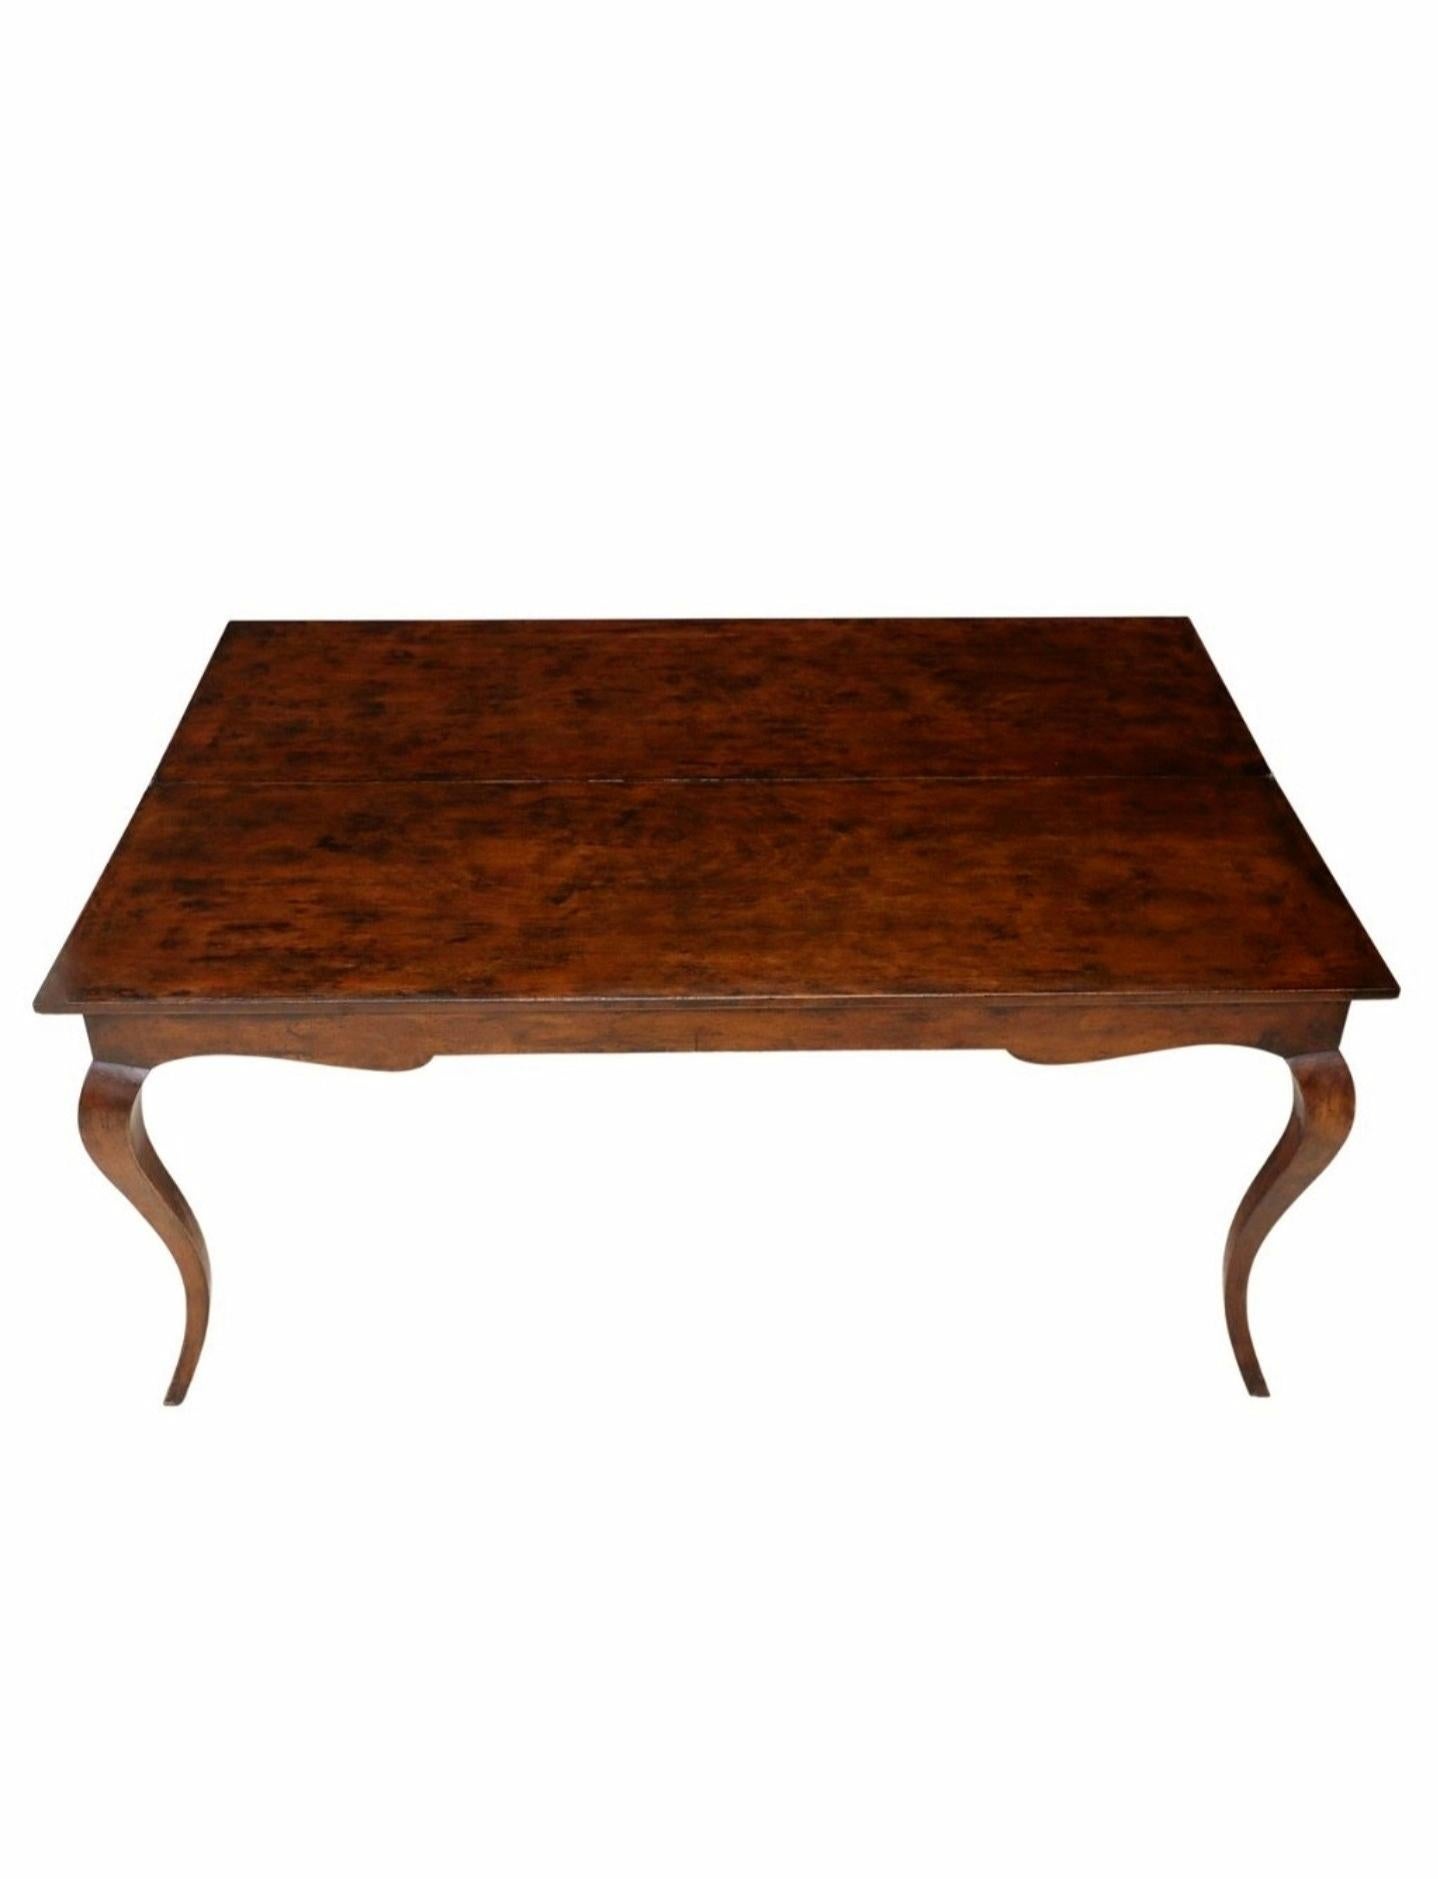 A rare French Provincial farmhouse flip-top extension kitchen harvest table with beautifully aged warm rustic patina!

Born in Provincial France in the late 19th century, exceptionally executed in sophisticated Louis XV Rococo taste, having a long